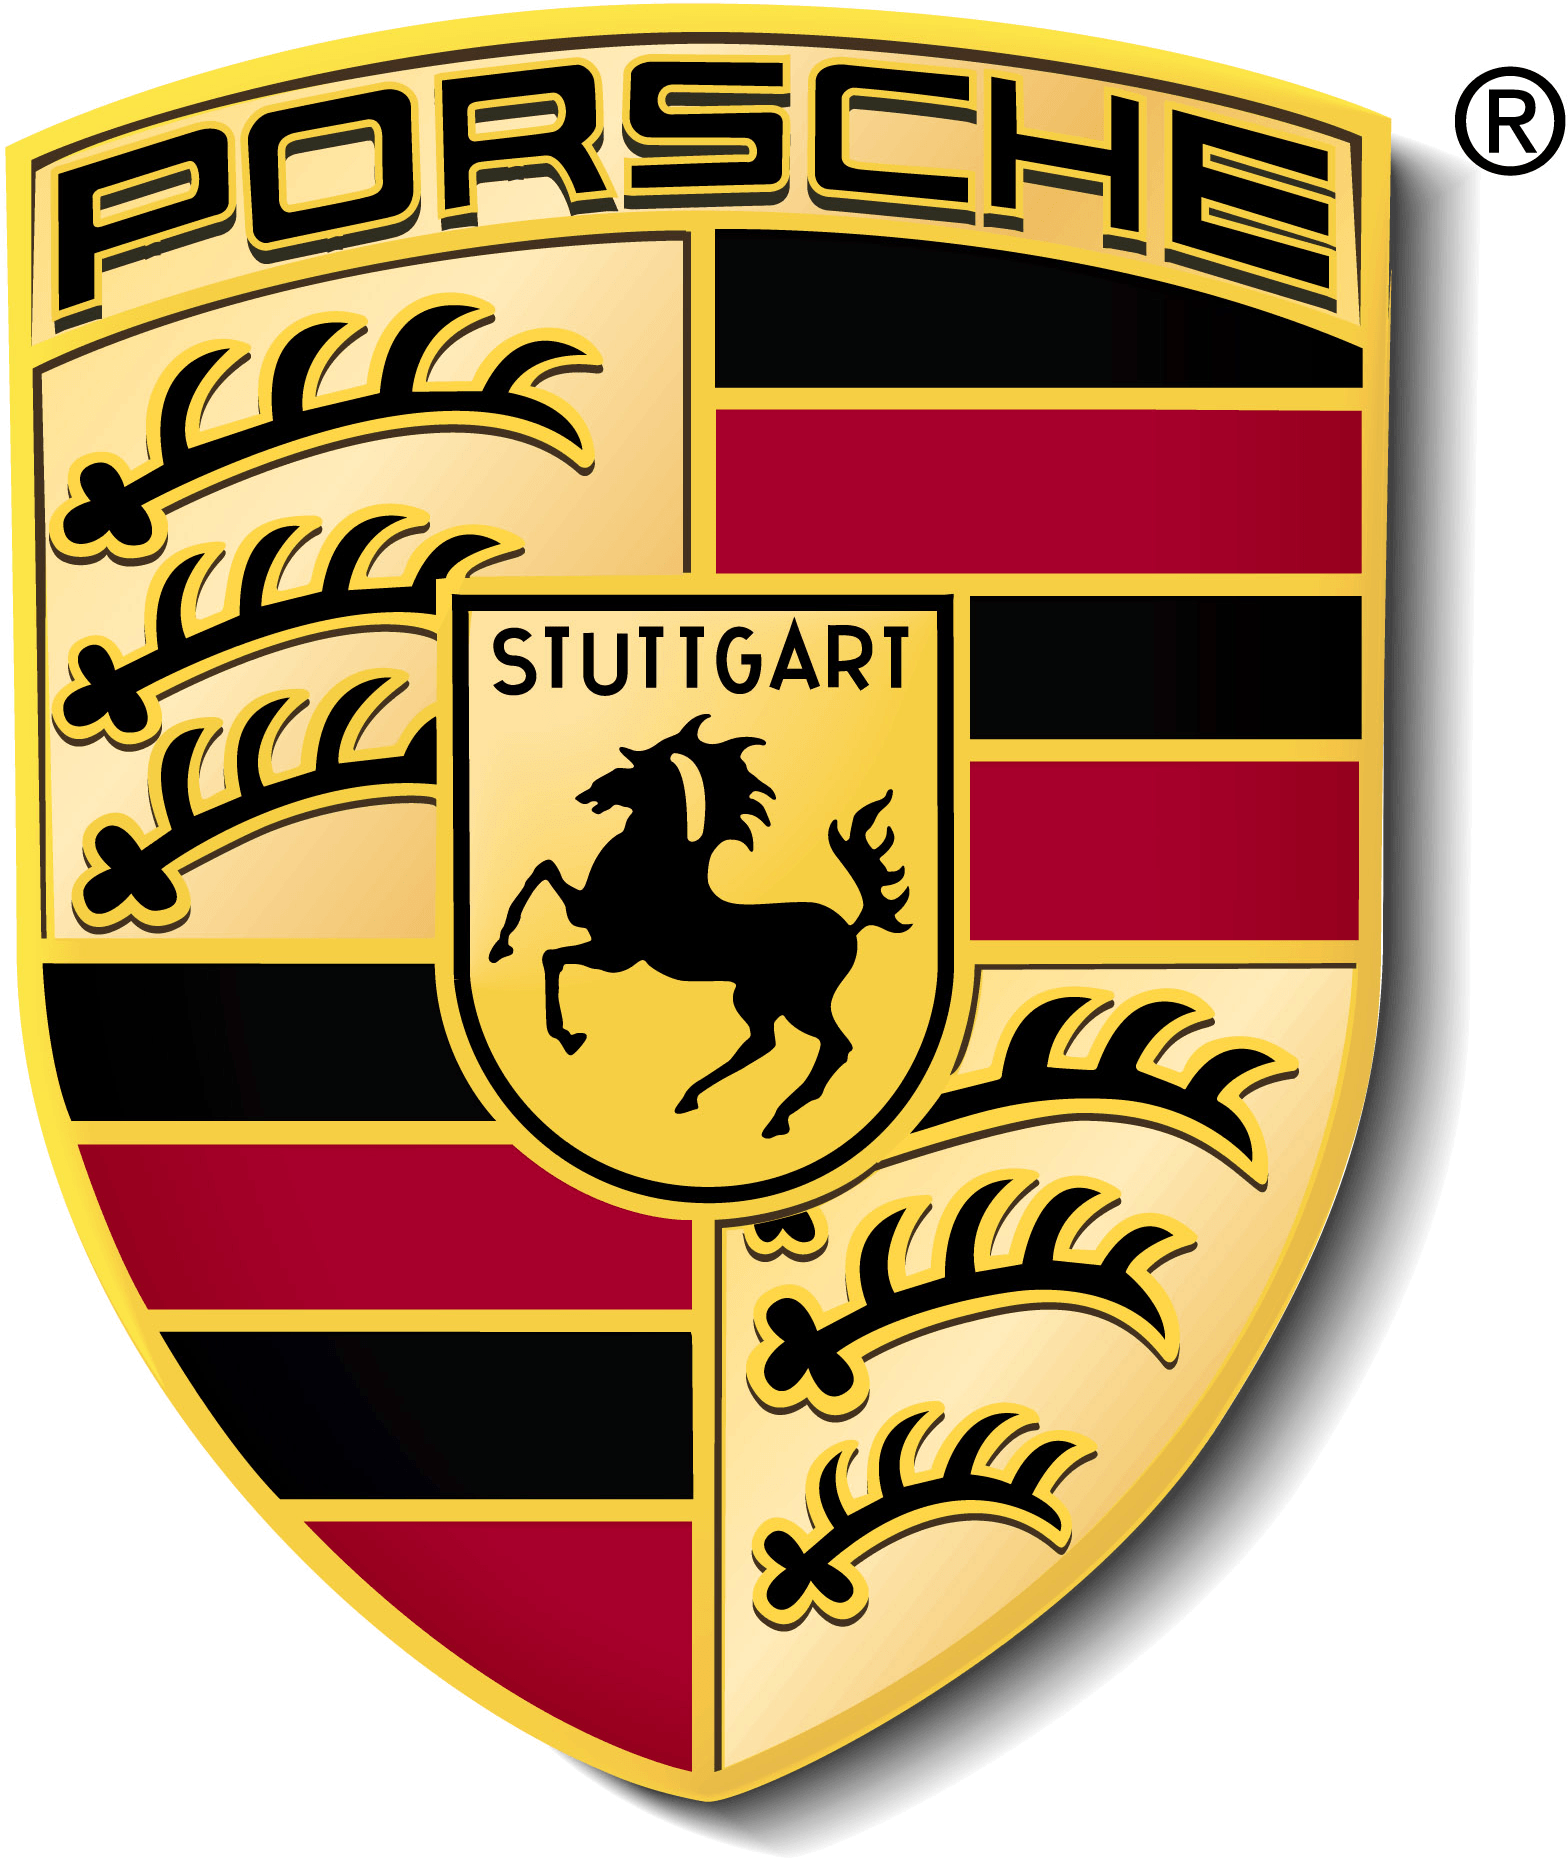 A F in Shield Car Logo - German flag colors (Company is based out of Germany) and shield type ...